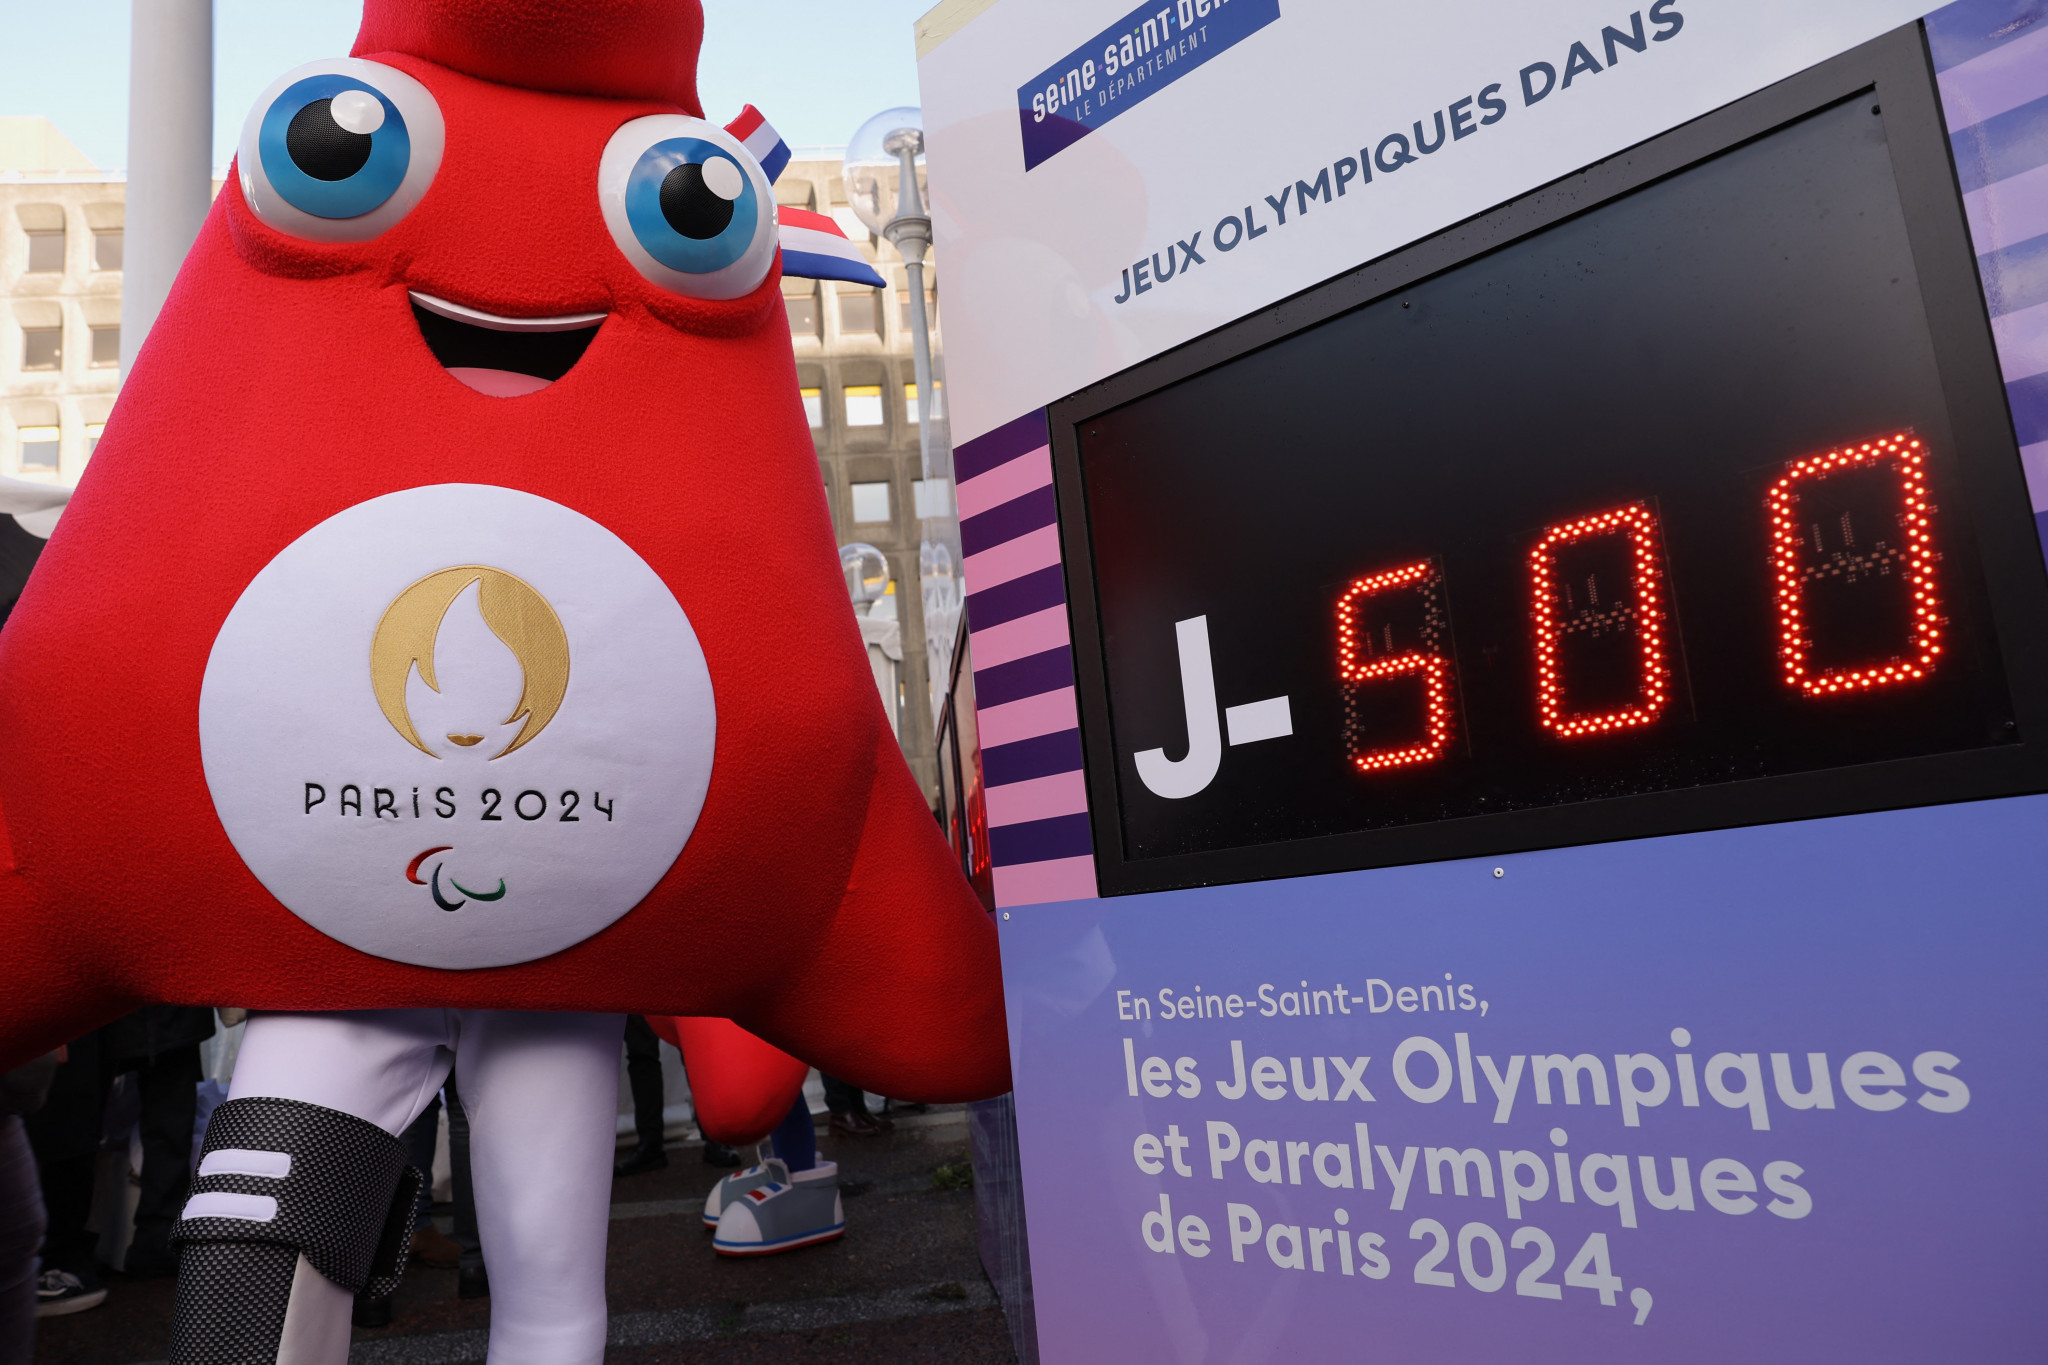 Macron ready to "receive the planet" for Paris 2024 as global relay begins to mark 500 days to go  